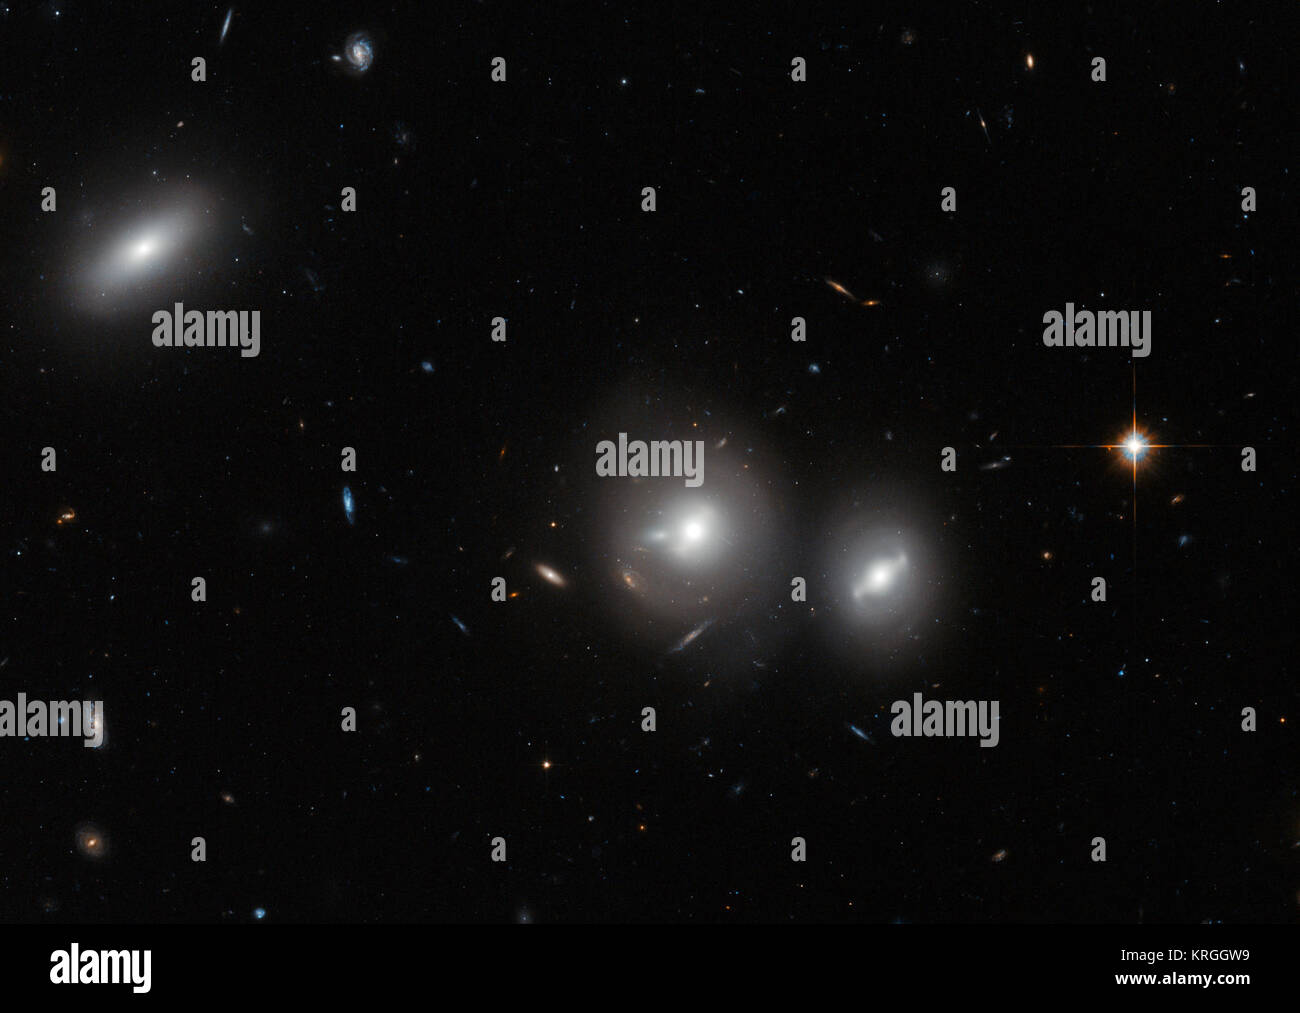 In this new image Hubble peeks into the Coma Cluster, a massive gathering of galaxies located towards the constellation of Coma Berenices. This large cluster is around 350 million light-years away from us and contains over 1000 identified galaxies, the majority of which are elliptical. The bright, saucer-shaped objects surrounded by misty halos in this image are galaxies, each of them host to many millions of stars. The background of the image is full of distant galaxies, many of them with spiral shapes, that are located much further away and do not belong to the cluster. Visible in this image Stock Photo